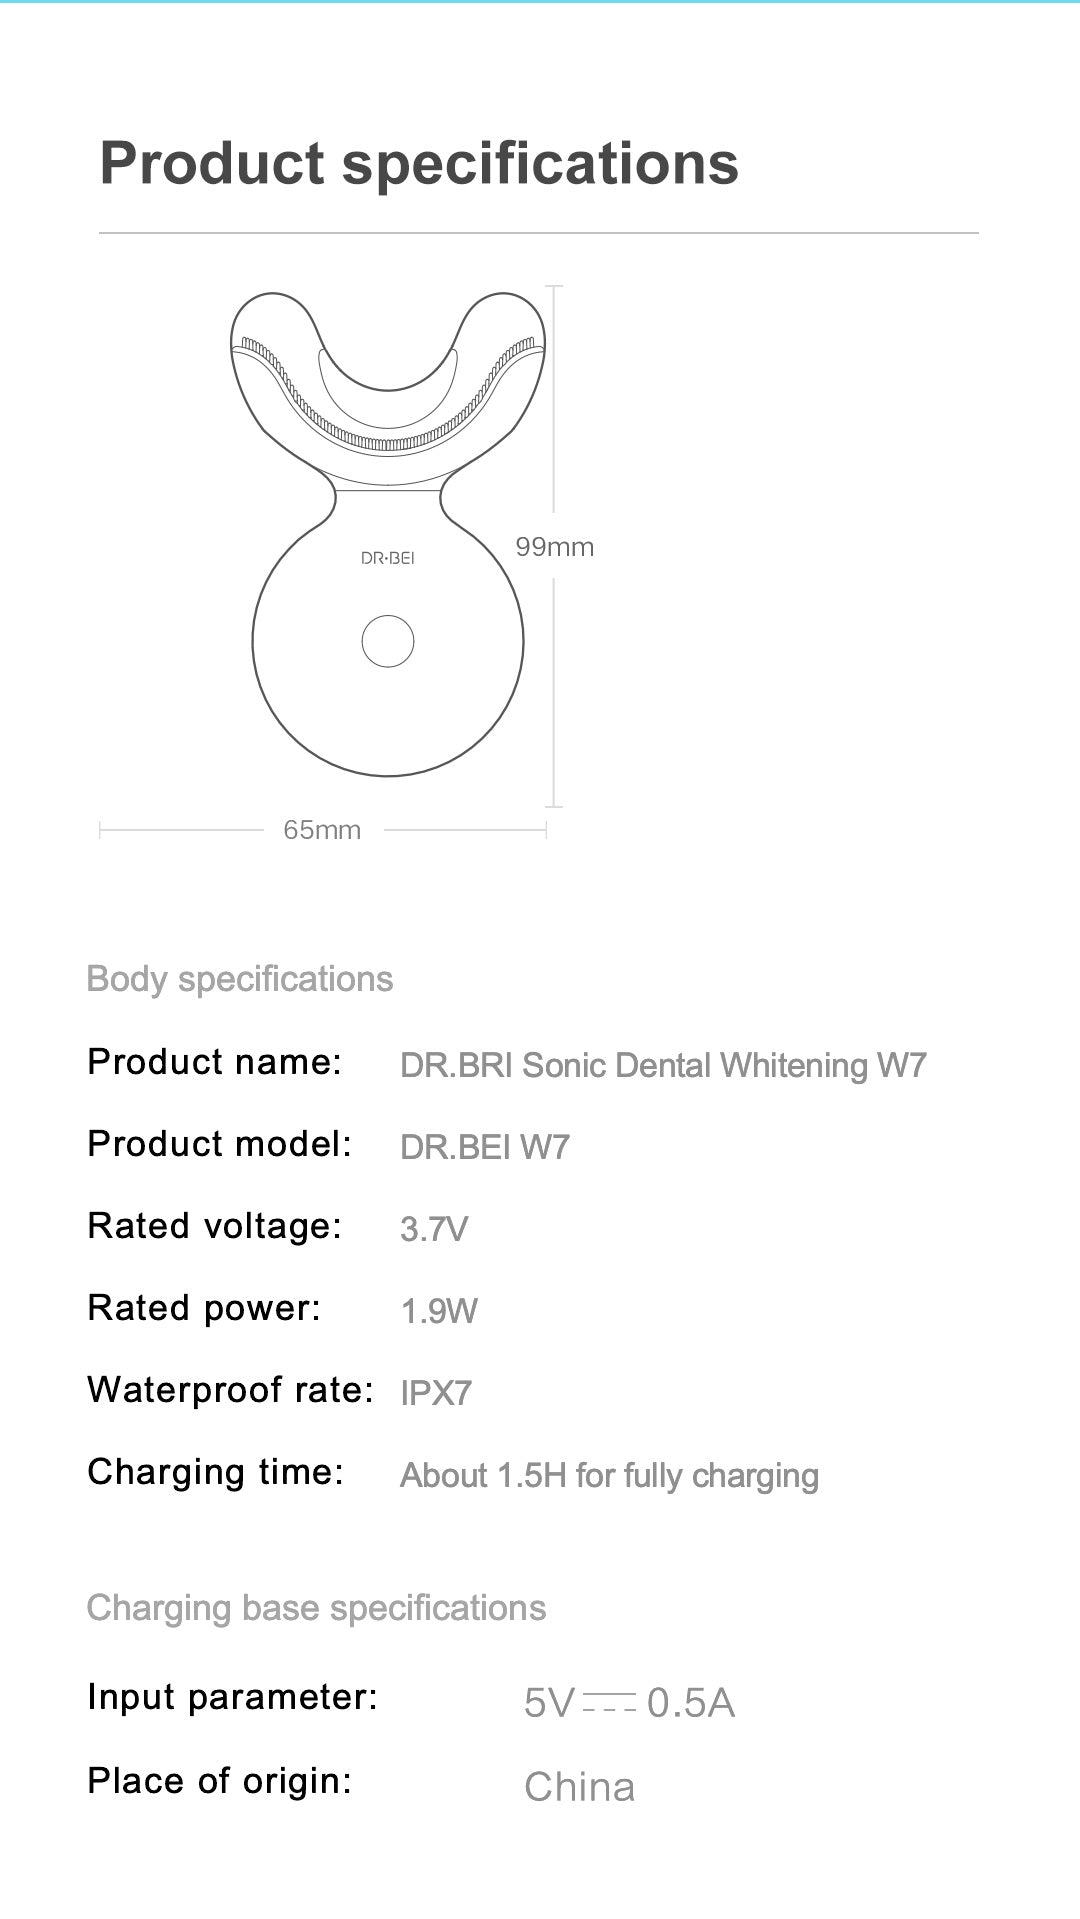 DR.BEI W7 Dental Whitening Kit Xiaomi Youpin DR.BEI W7 Dental Teeth Whitening Equipment Sonic Acoustic Oral Care Beautifier IPX7 Waterproof Tooth Whitening Cleaning Tools